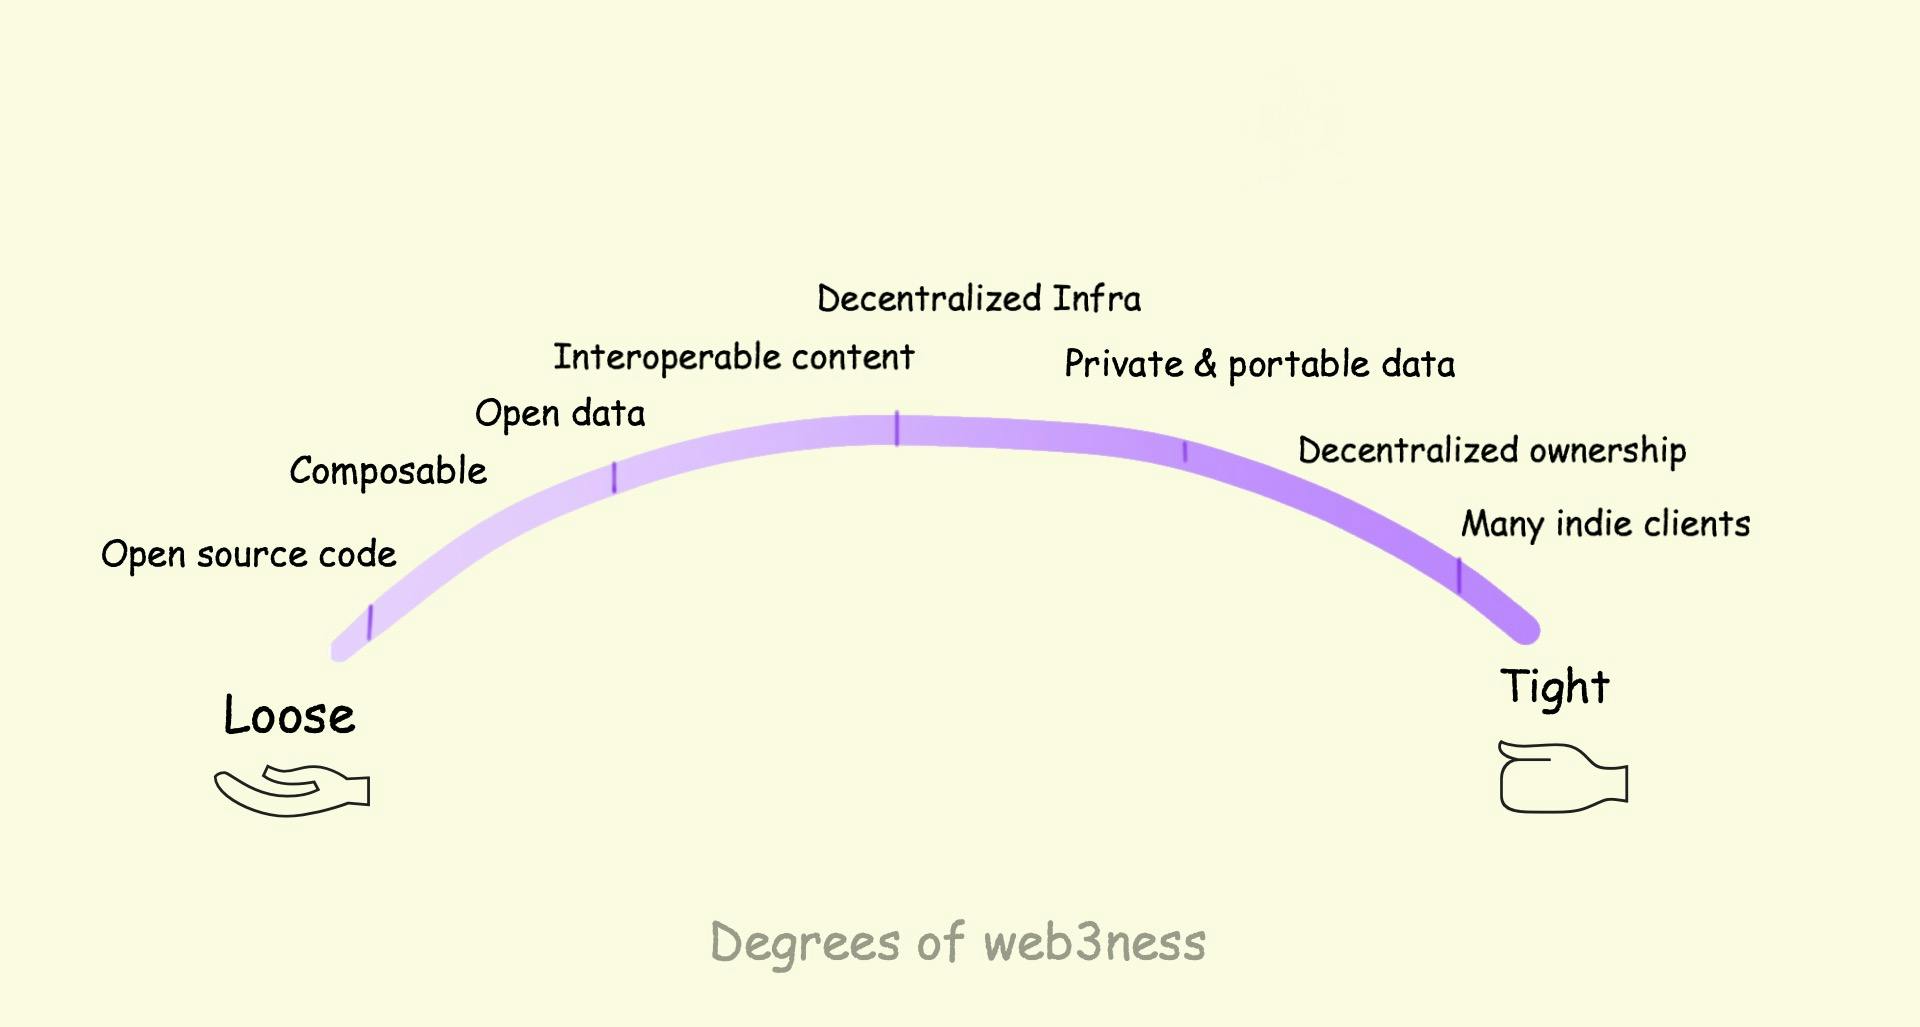 degrees of web3ness from loose to tight in no particular order